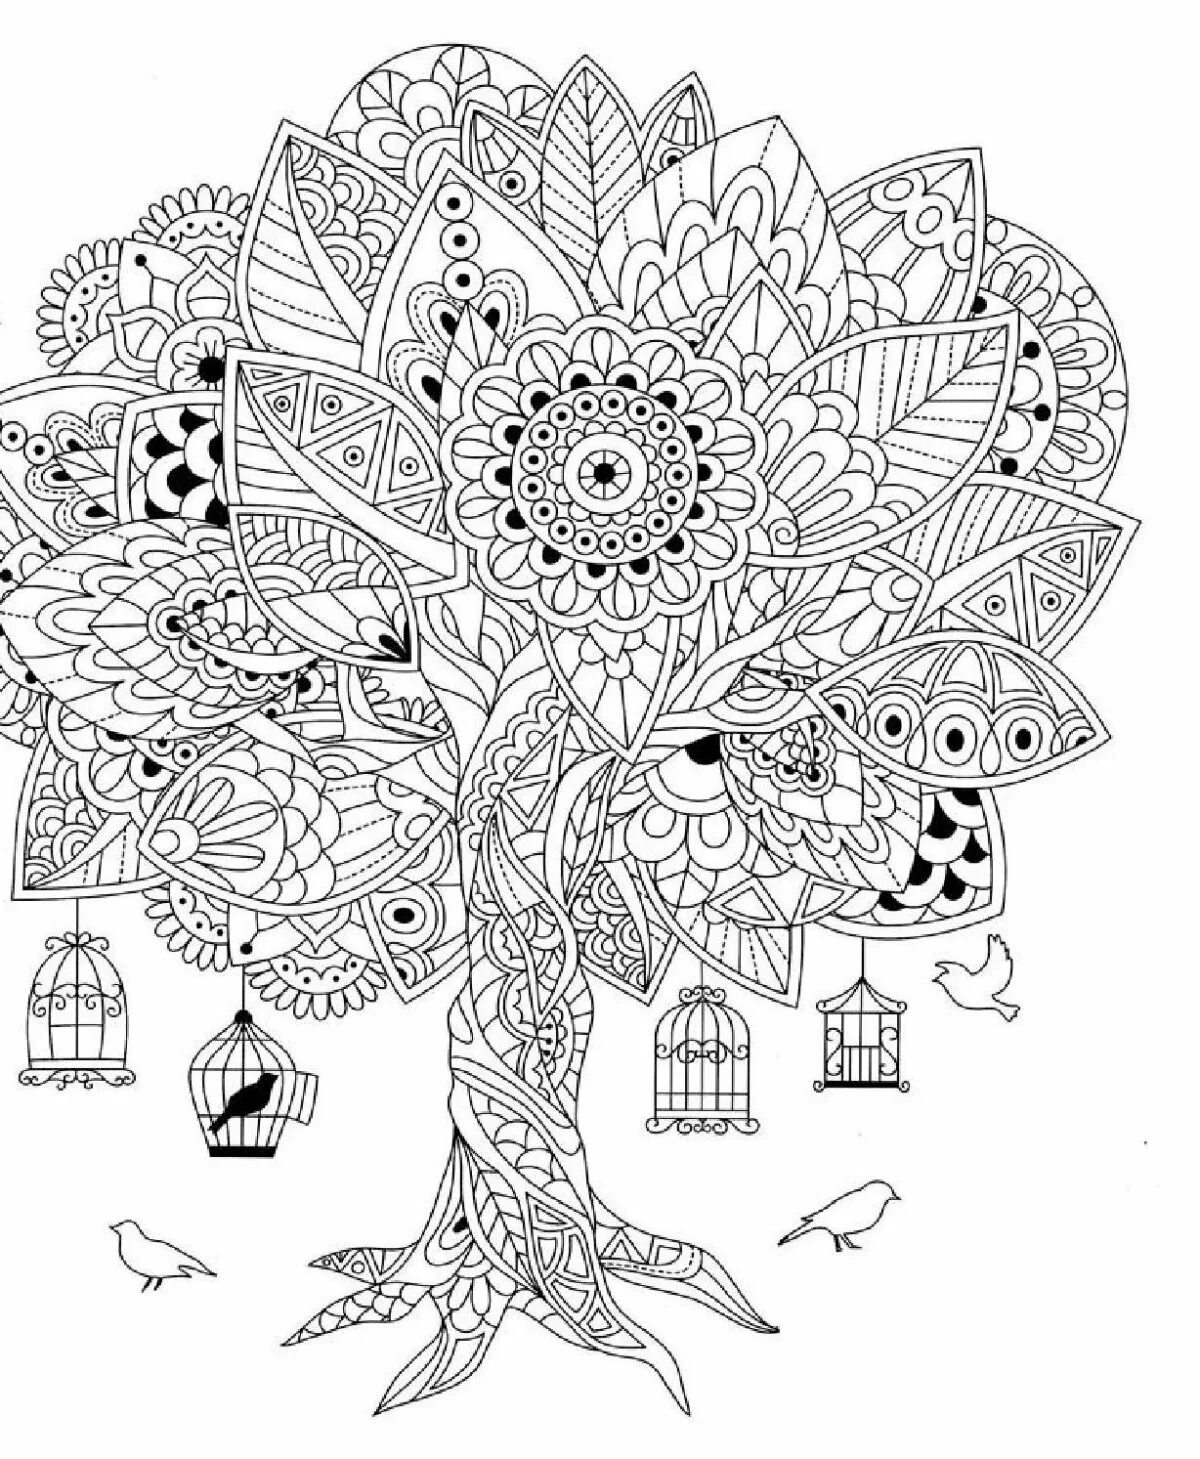 Art therapy coloring book for students with difficulty